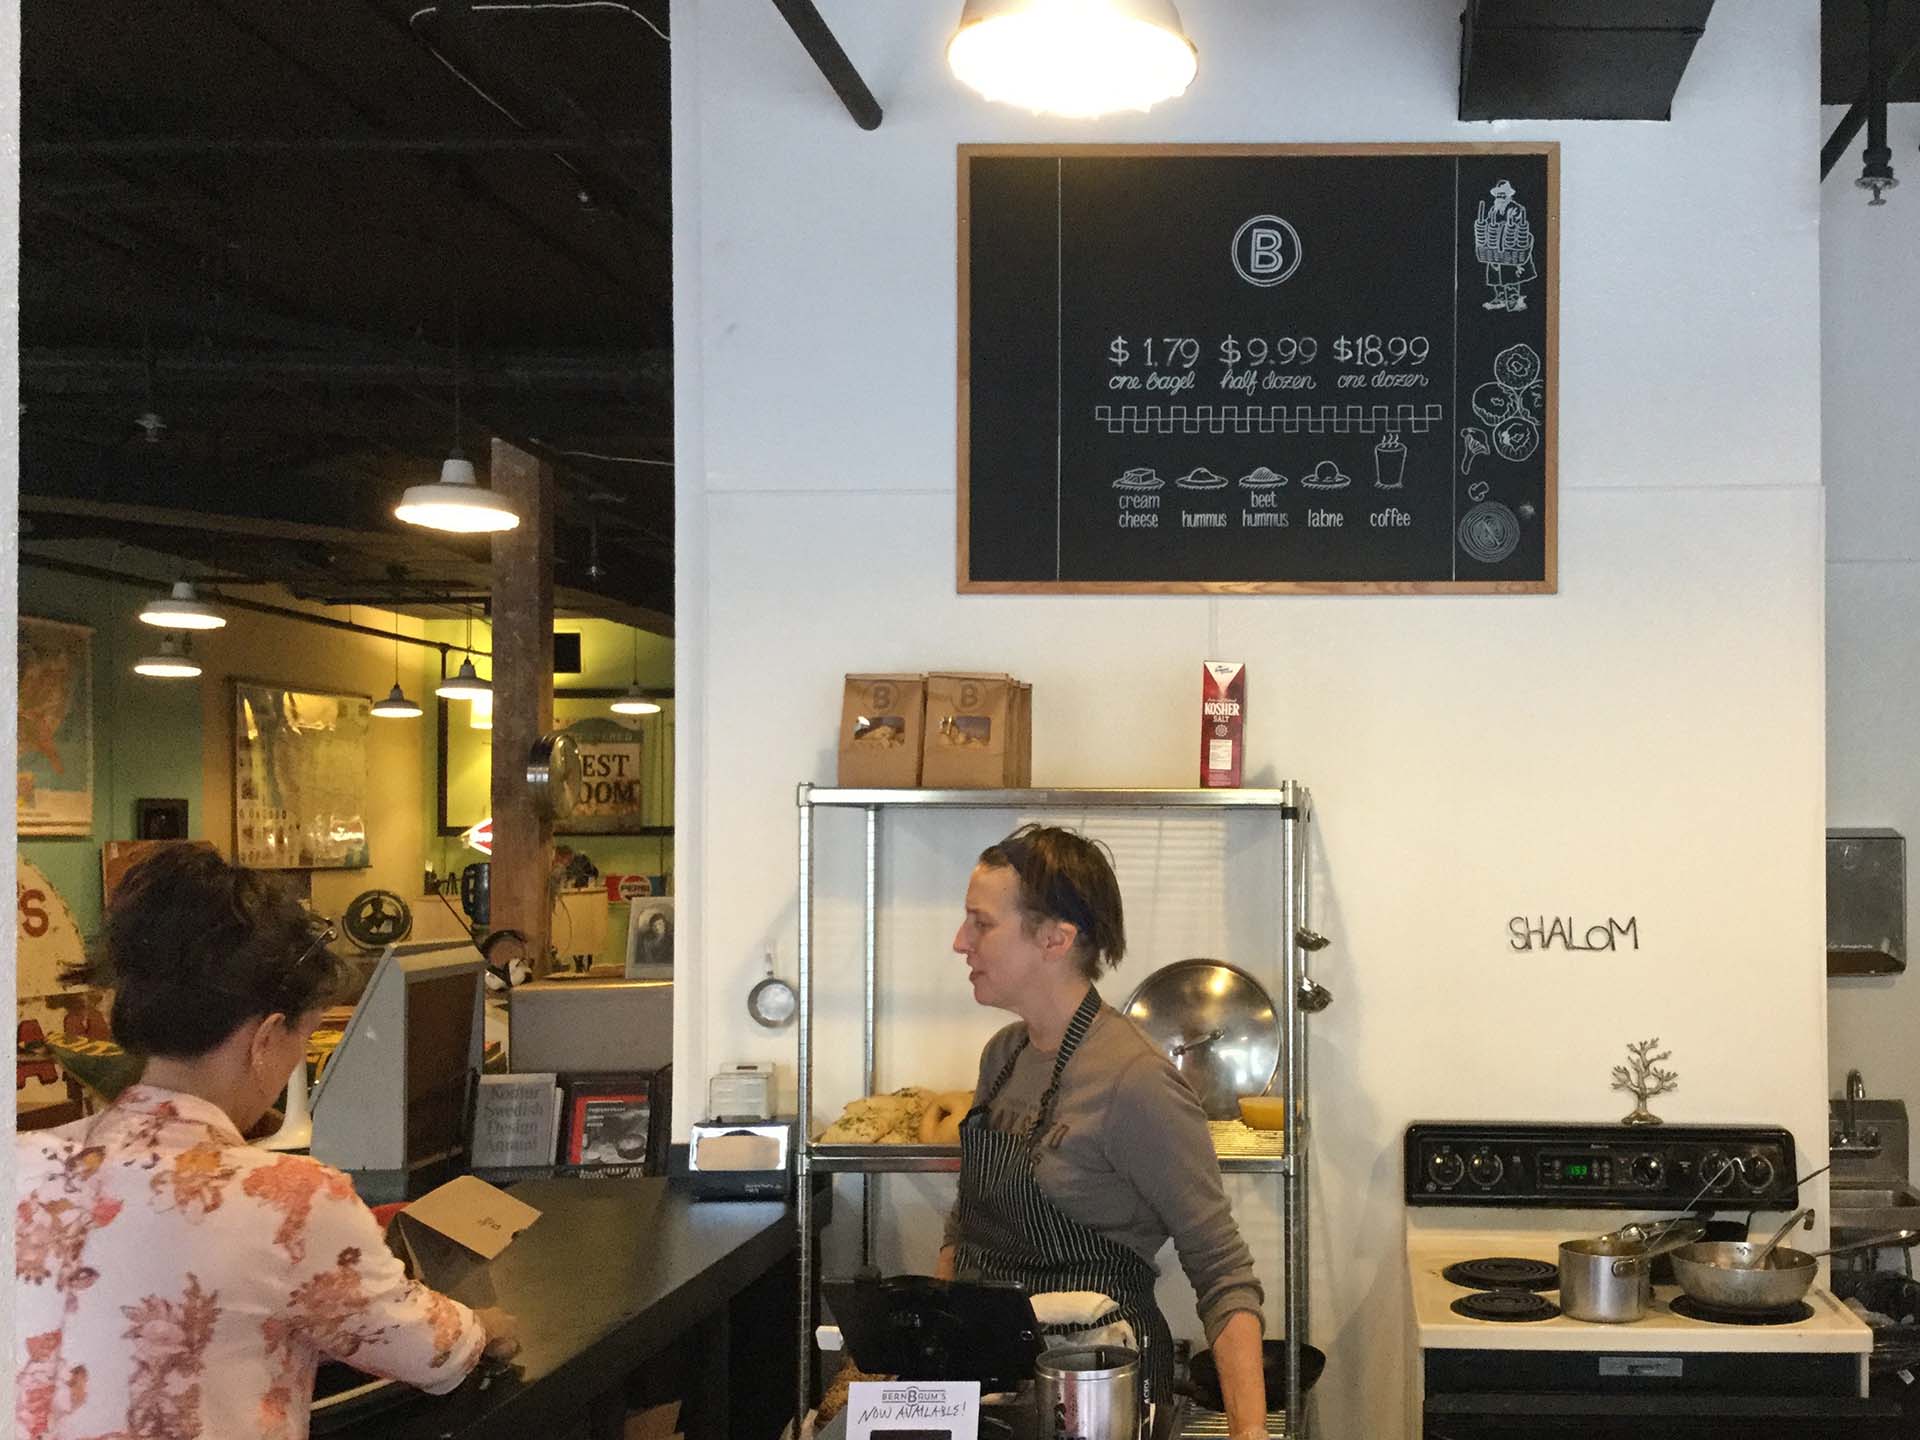 Hand-drawn pricing chalkboard on display behind counter where two women are talking